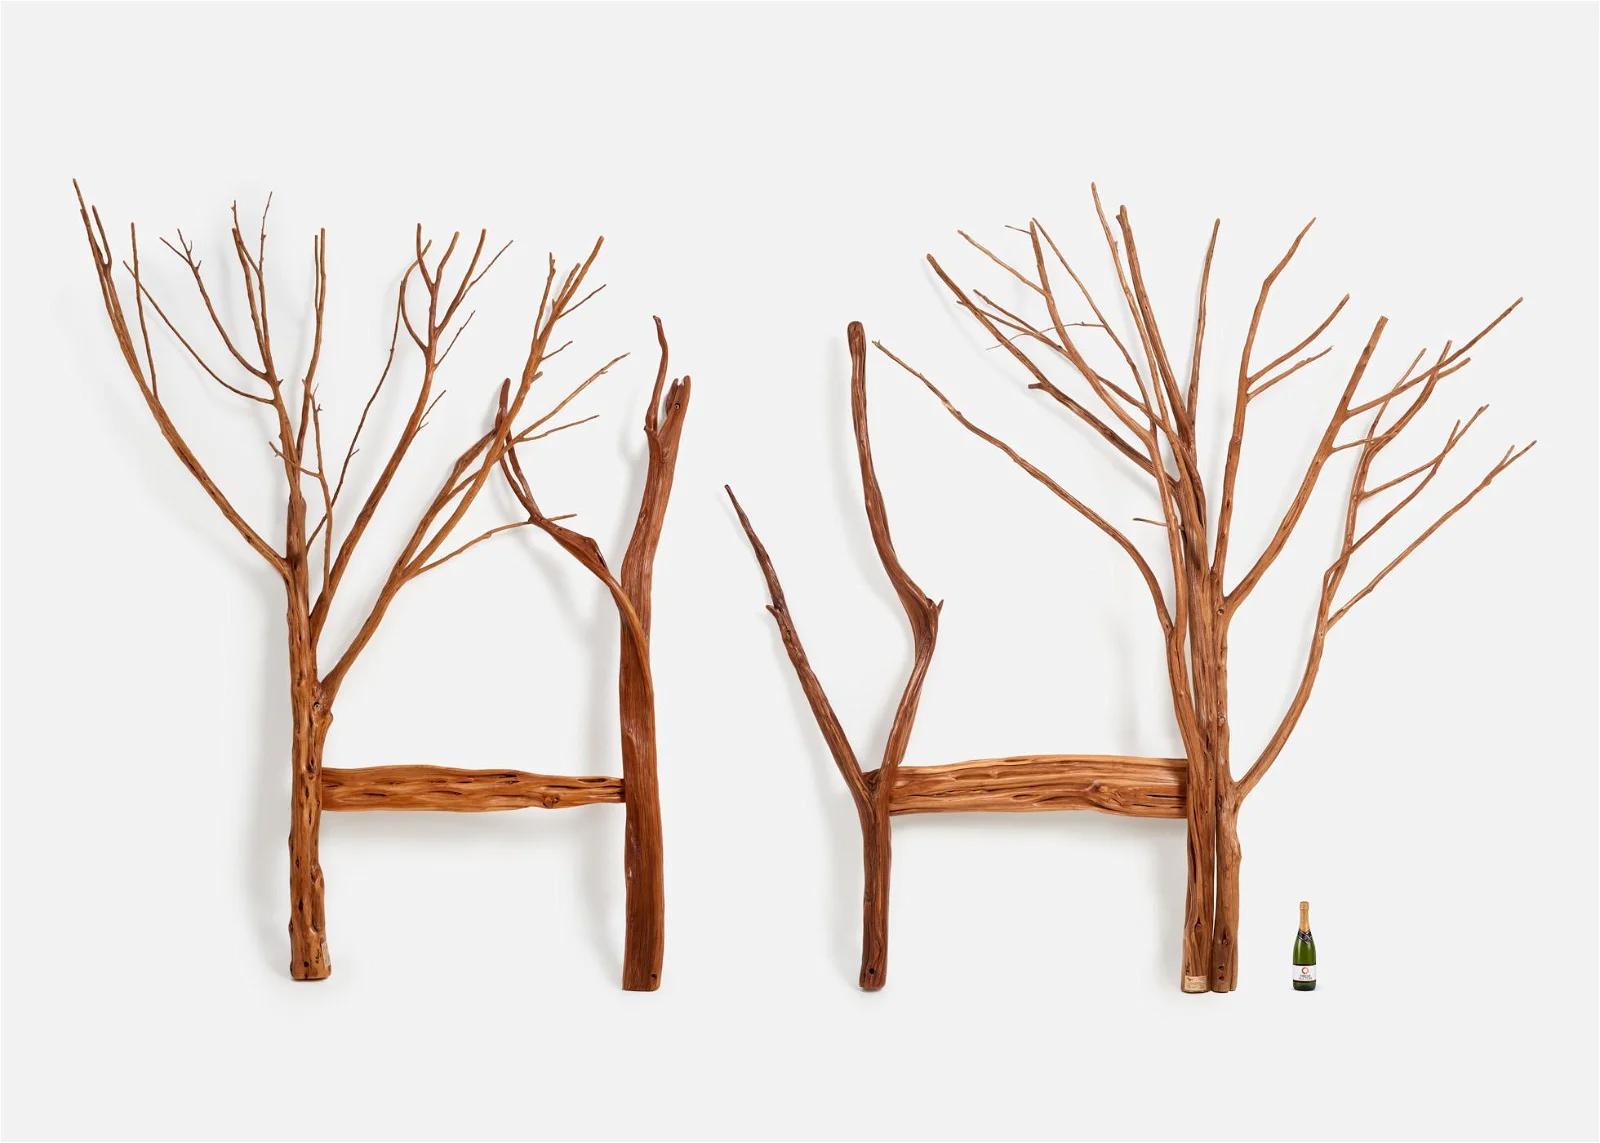 Pair of unique custom sculptural tree branch headboards designed by Rick Braun for Wood Merchant, a company in southwest Missouri. Each retaining the Ozarks area master craftsman's plaque. These bolt together in multiple pieces in order to move and